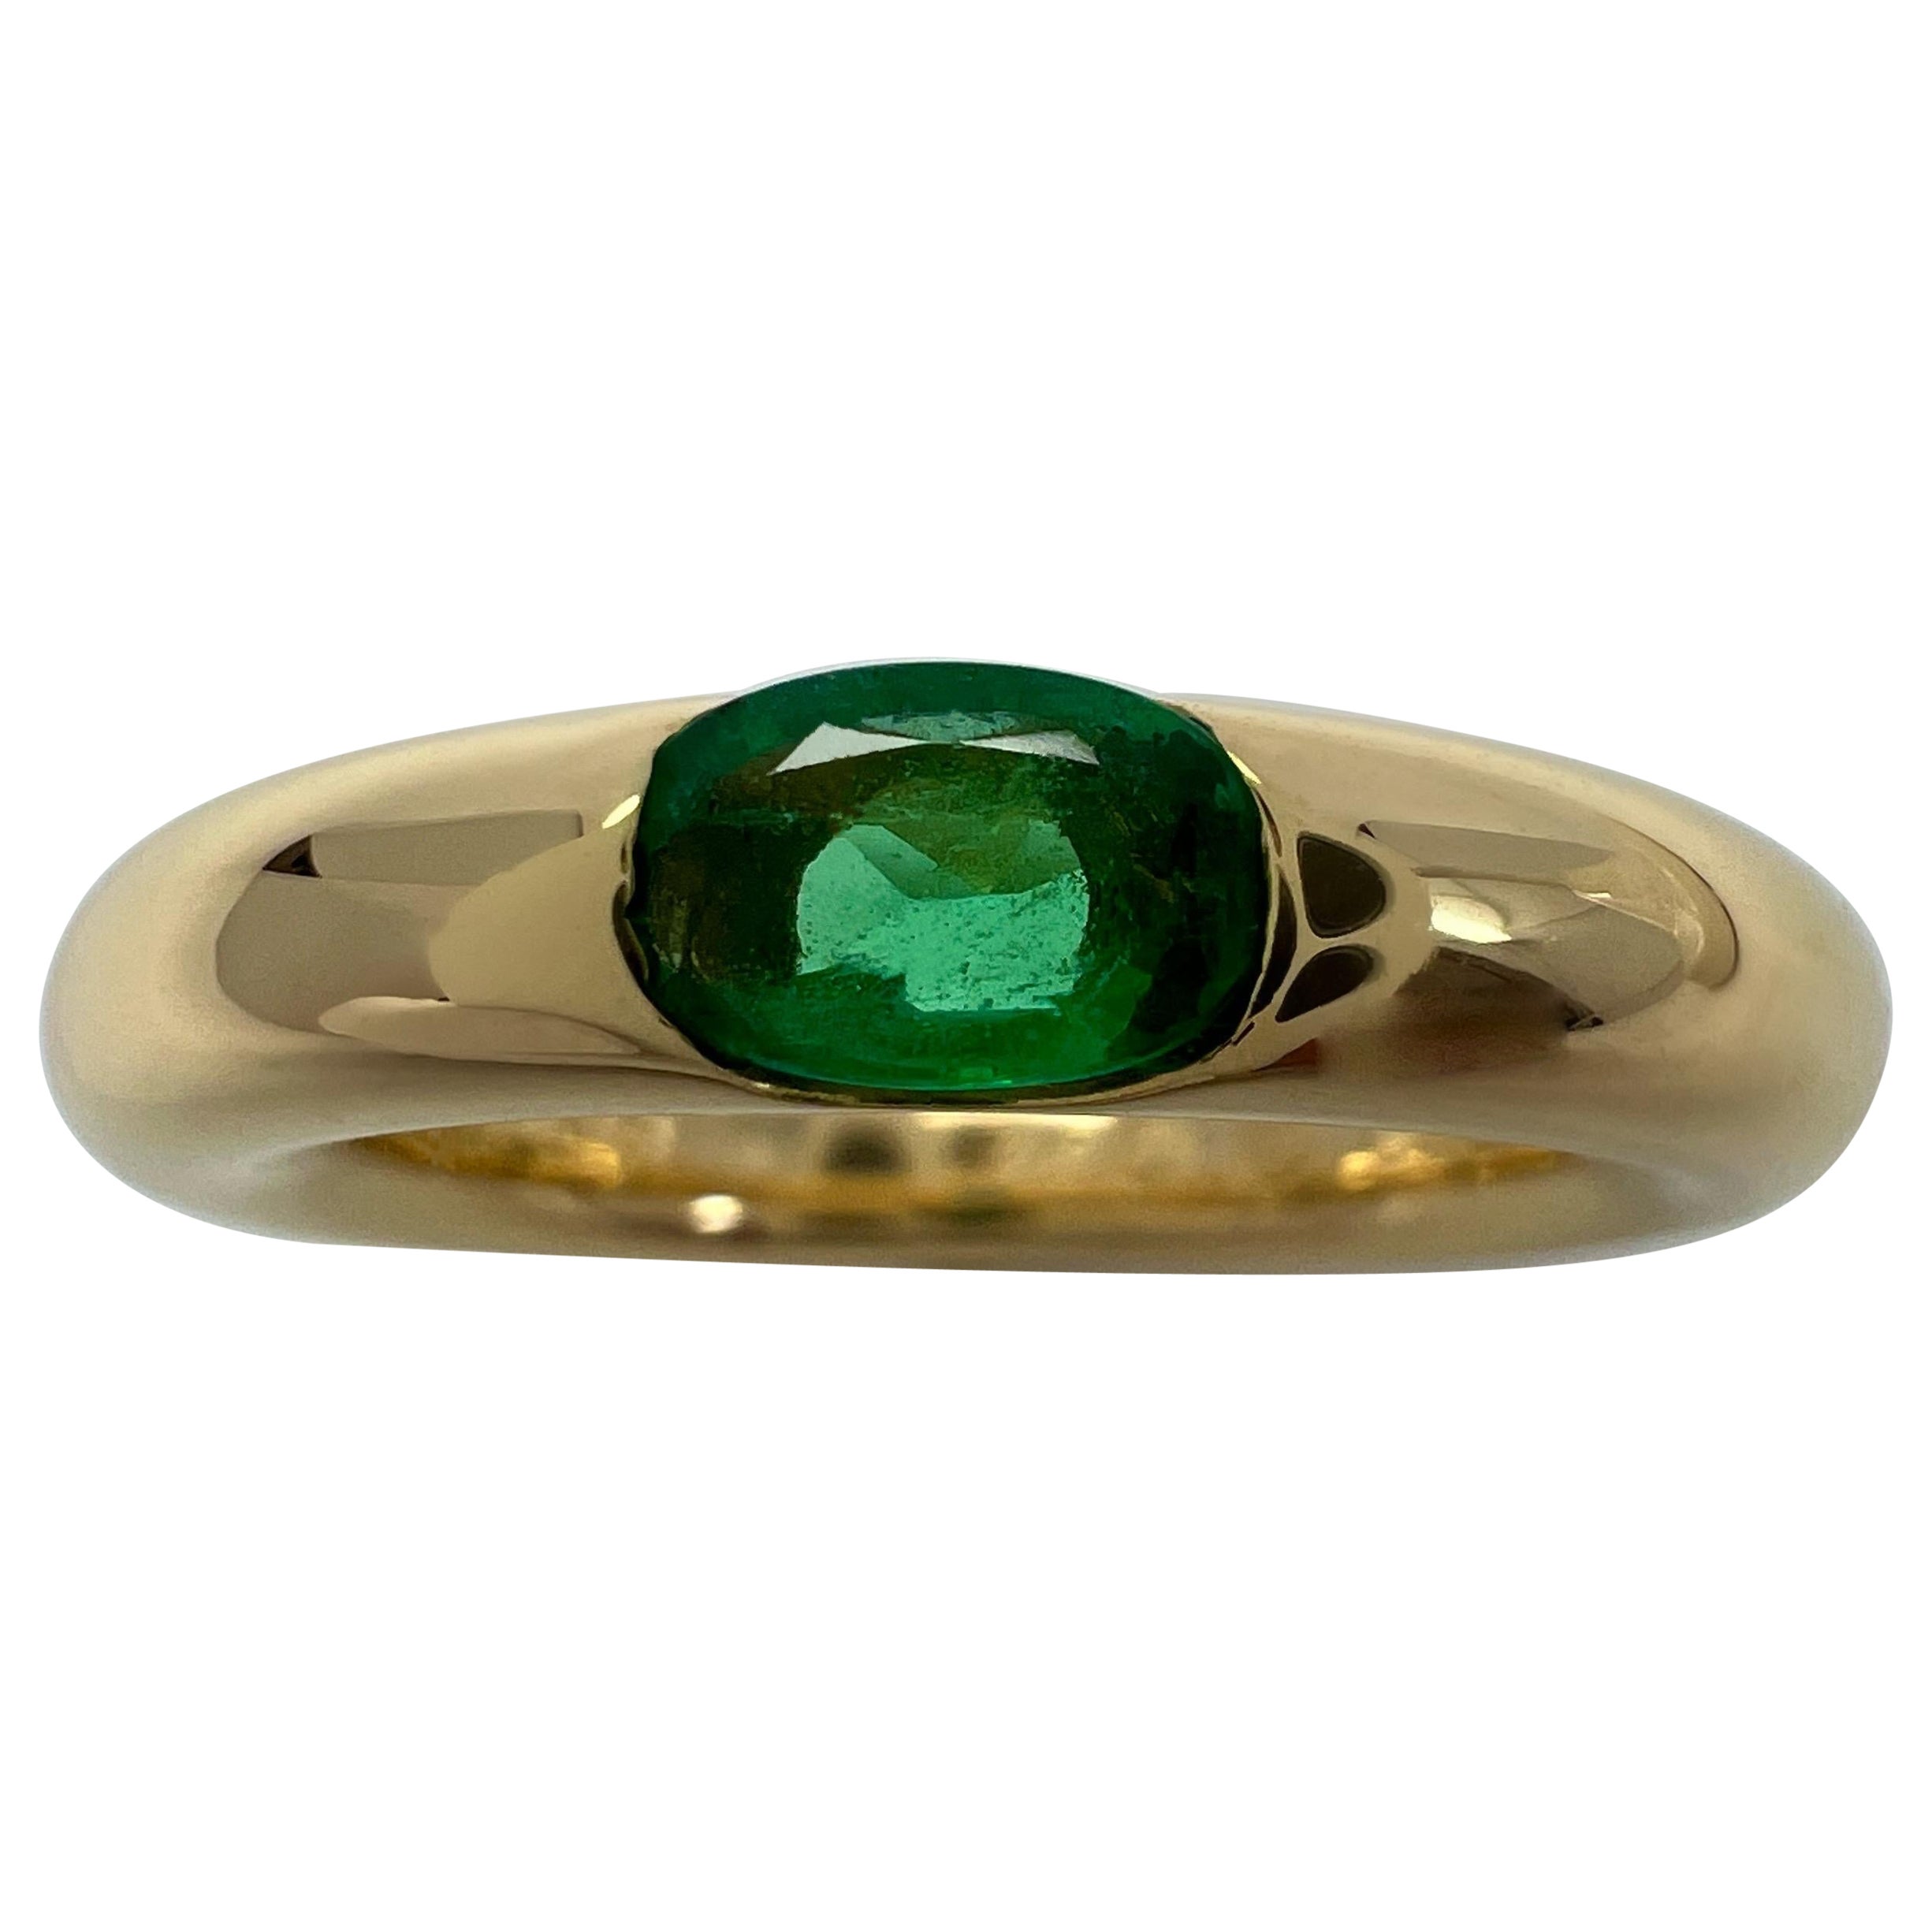 Vintage Cartier Emerald Vivid Green Ellipse 18k Yellow Gold Solitaire Ring 52